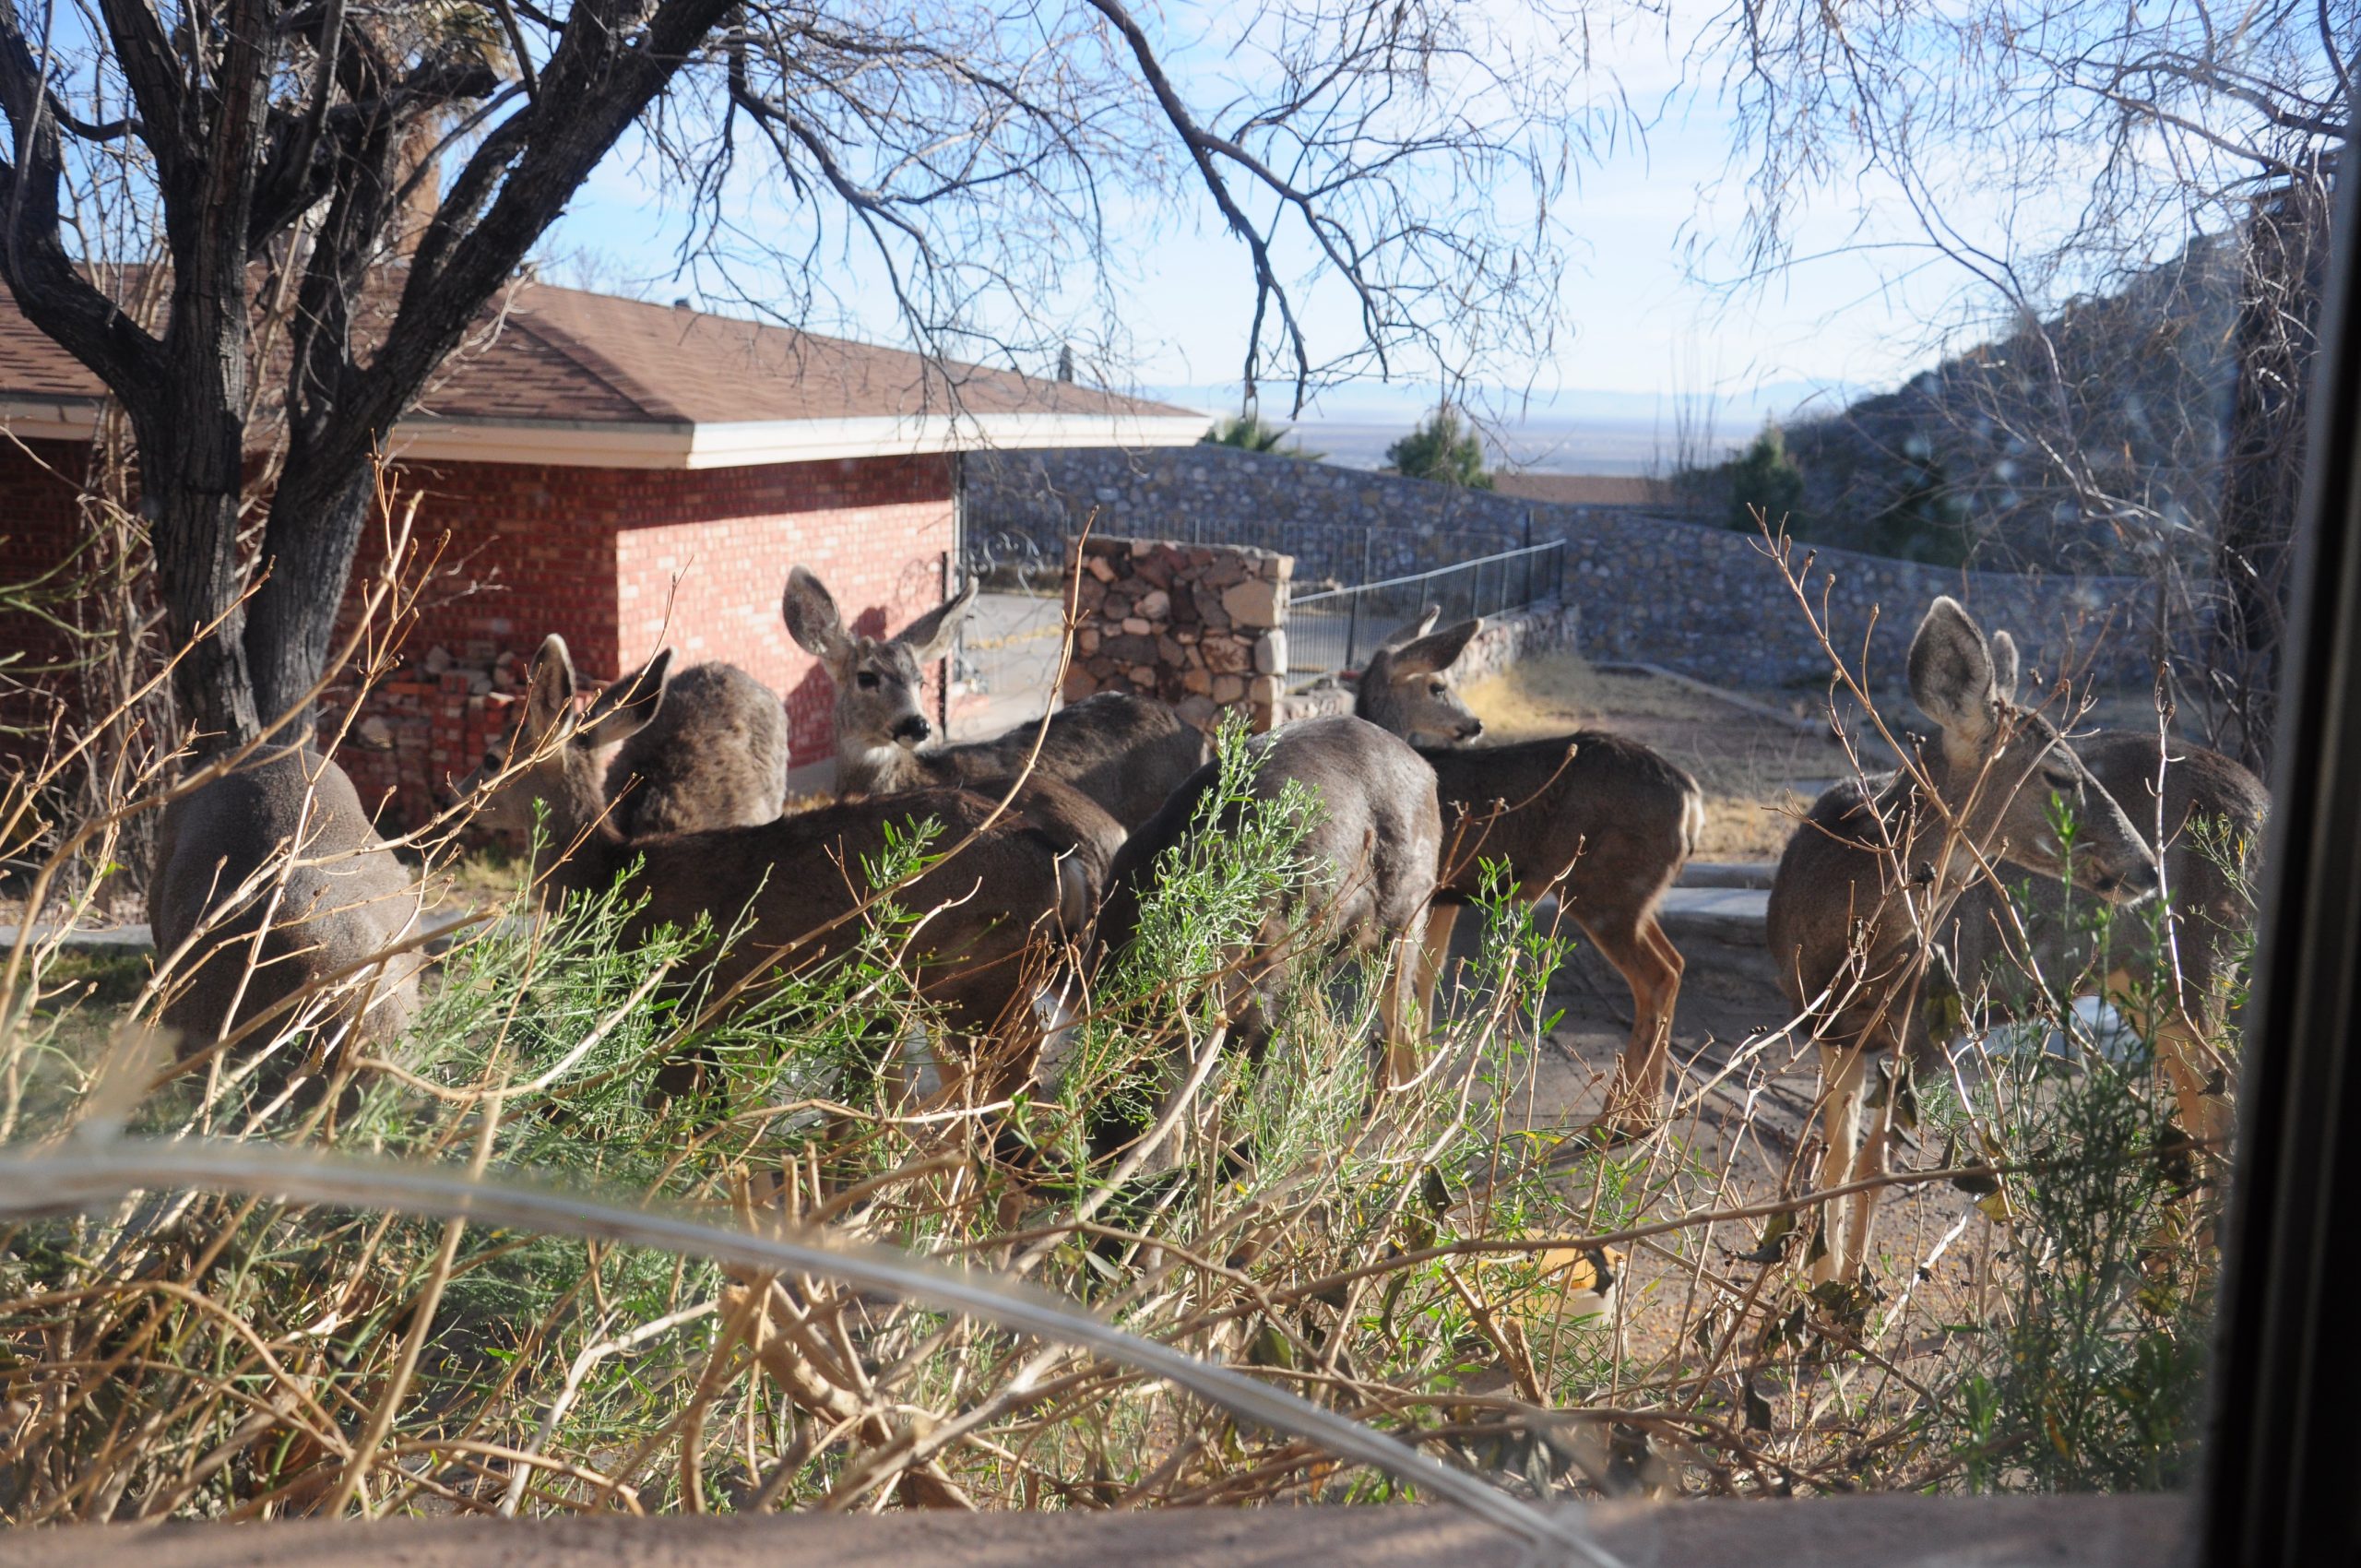 A congregation of deer on the side patio. Photo ©2018 Ann James Massey